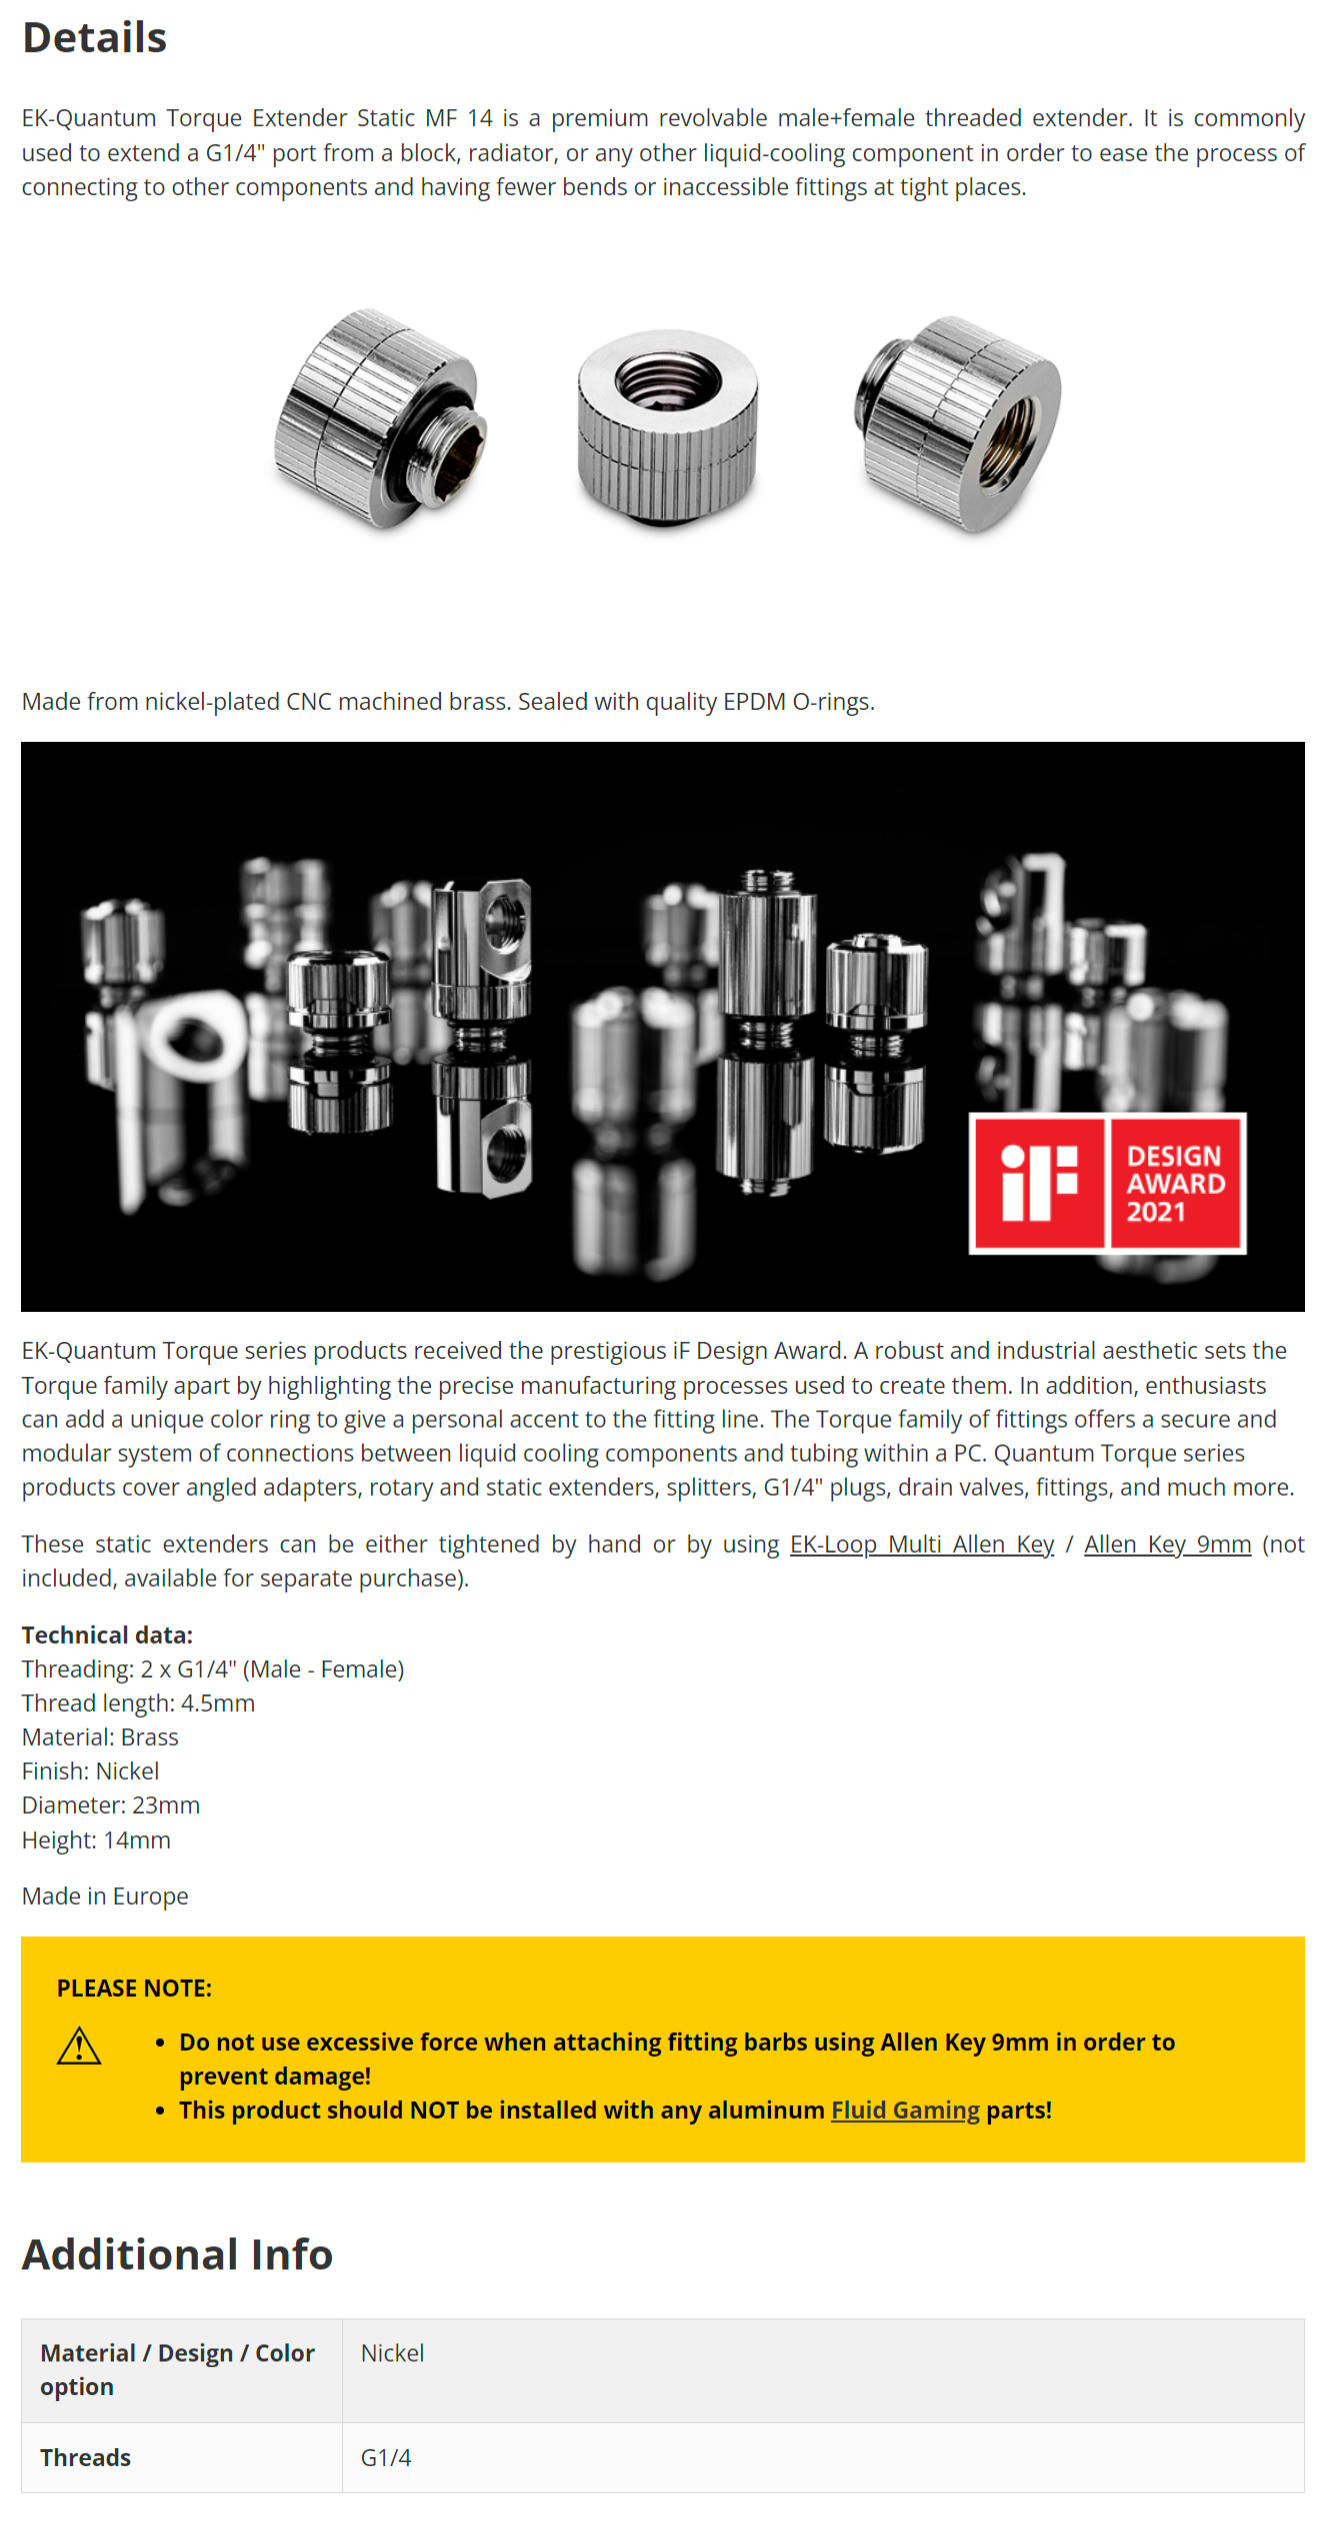 A large marketing image providing additional information about the product EK Quantum Torque Extender Rotary MF 14 - Nickel - Additional alt info not provided